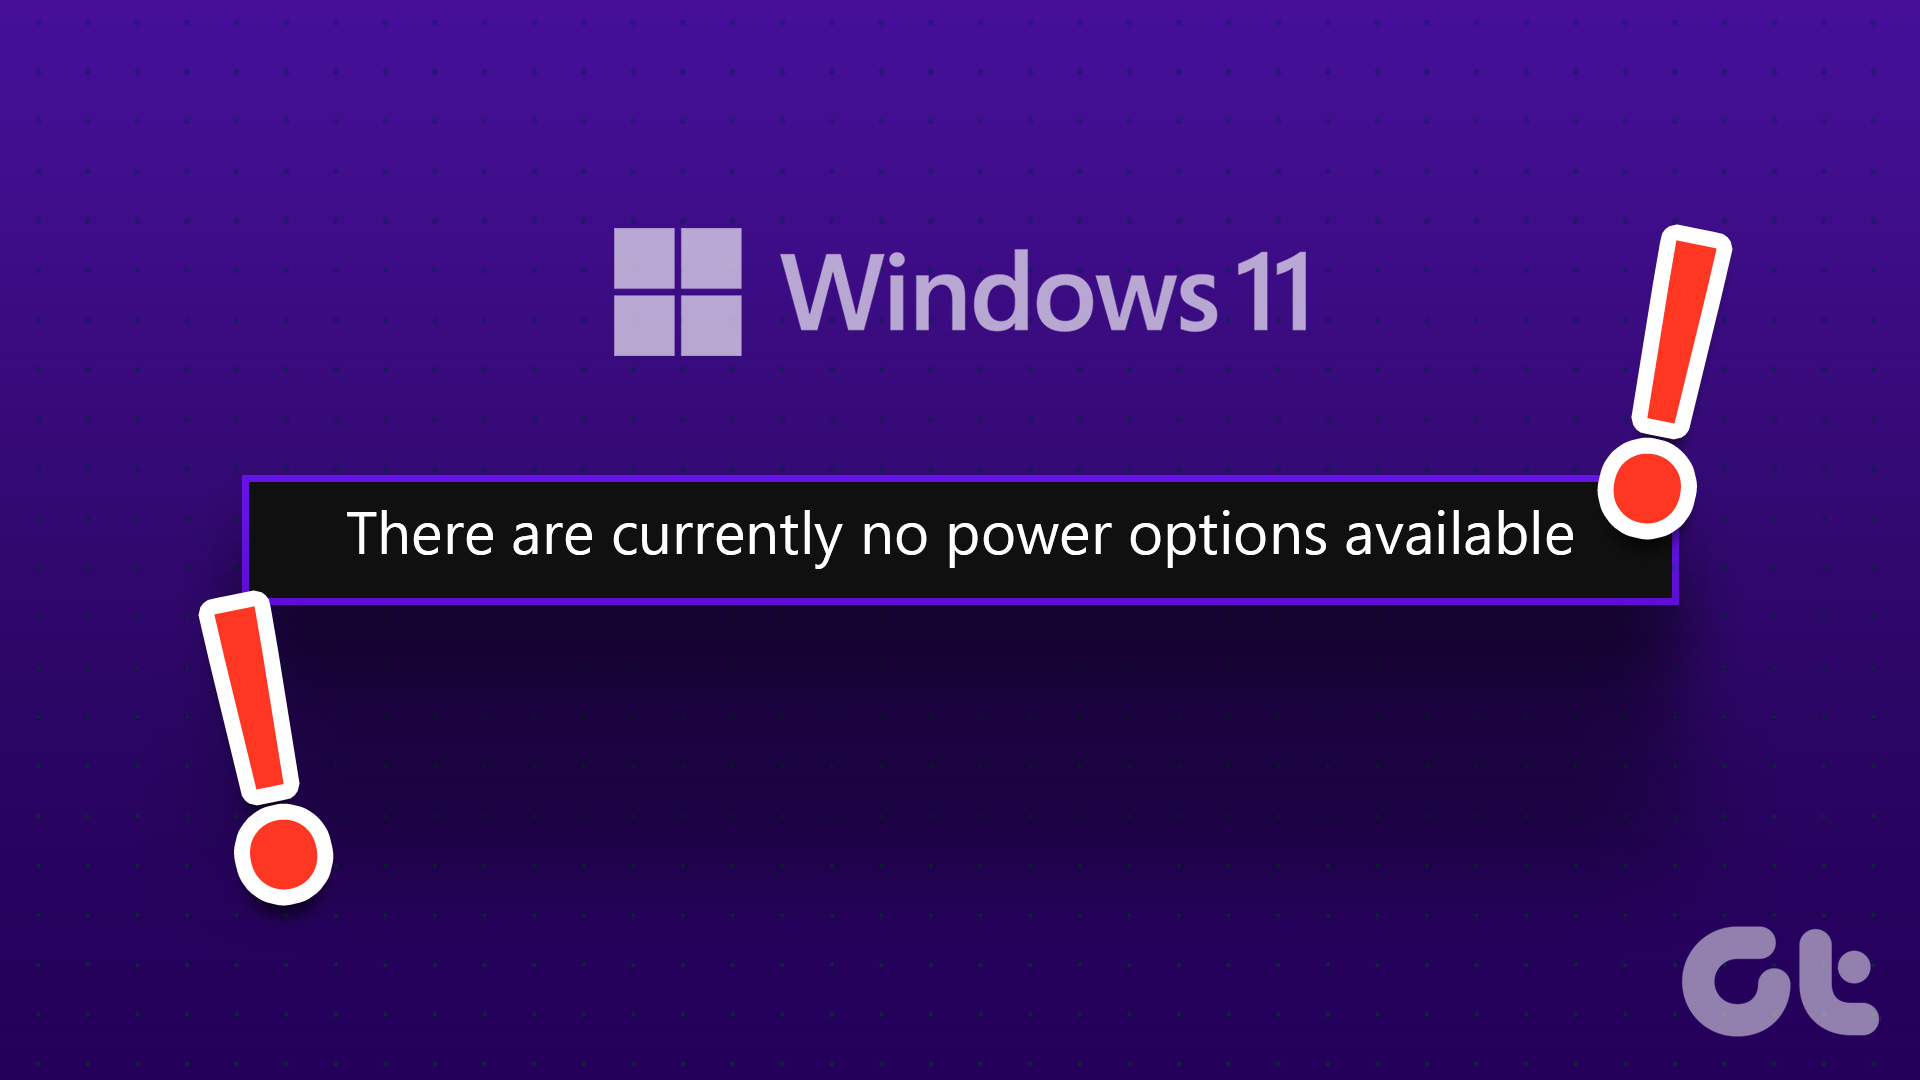 How to Fix ‘There Are Currently No Power Options Available’ Error in Windows